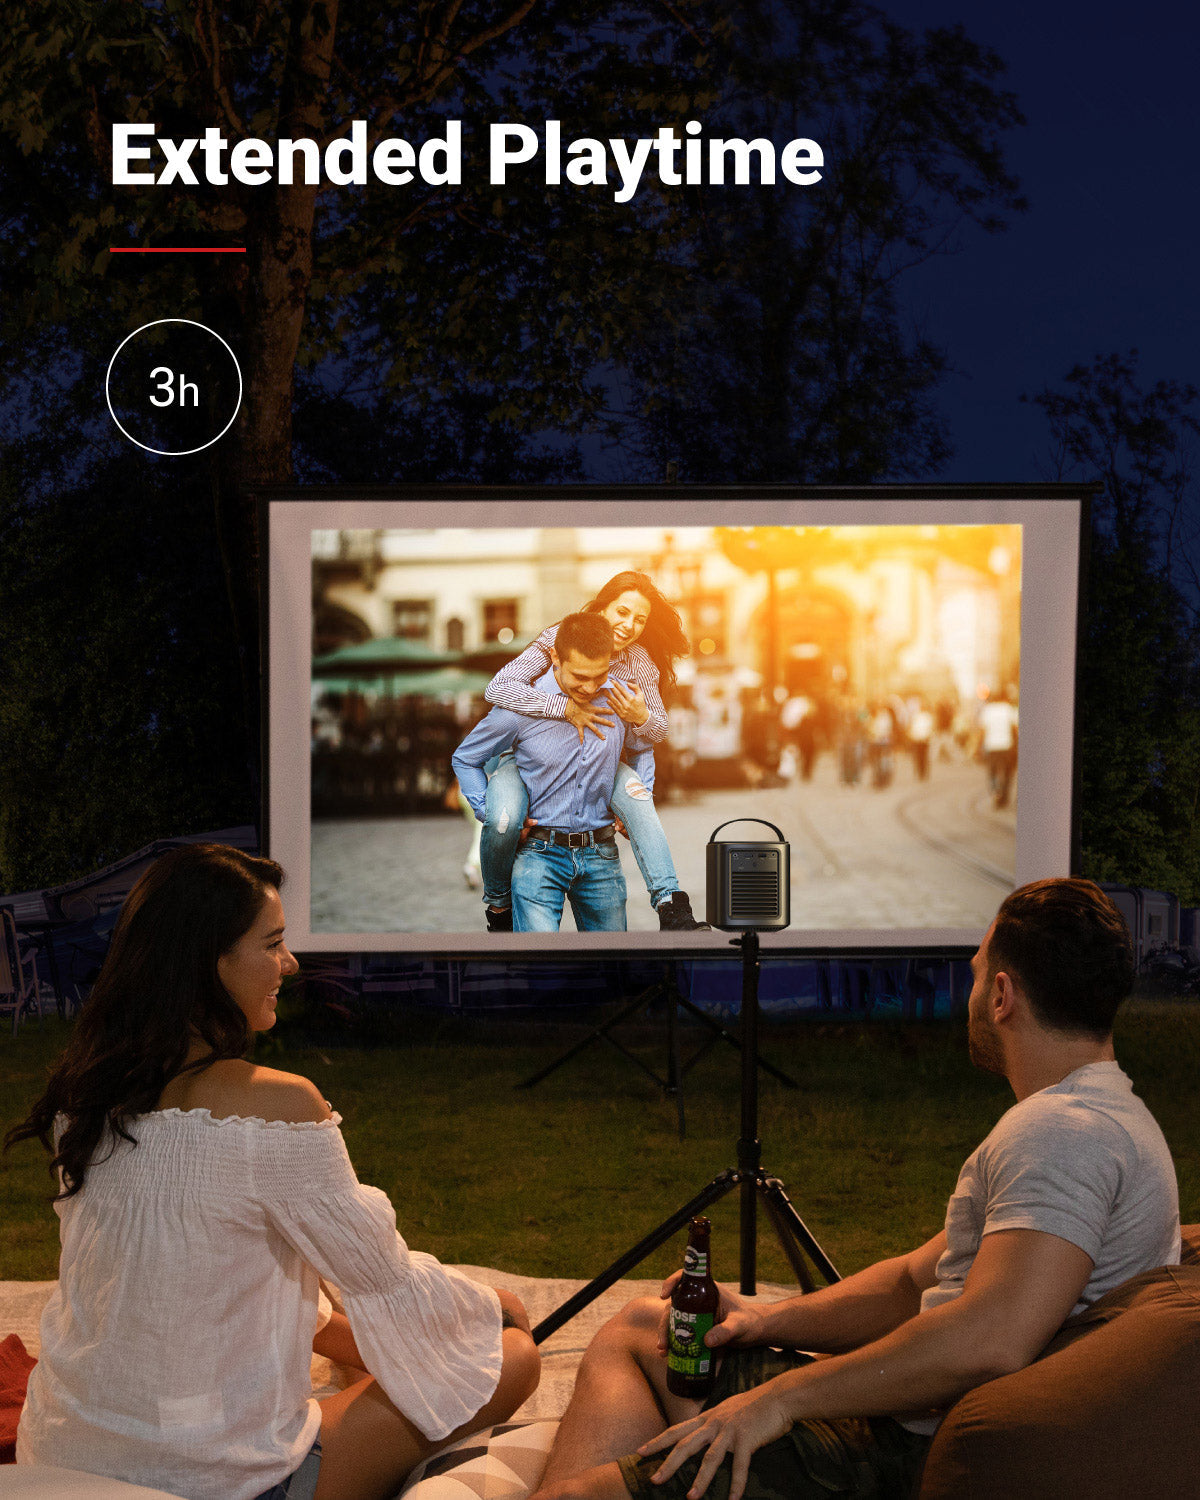 A couple sits in their backyard at night using a Nebula Mars 2 Pro portable projector on a stand to watch a romantic movie.